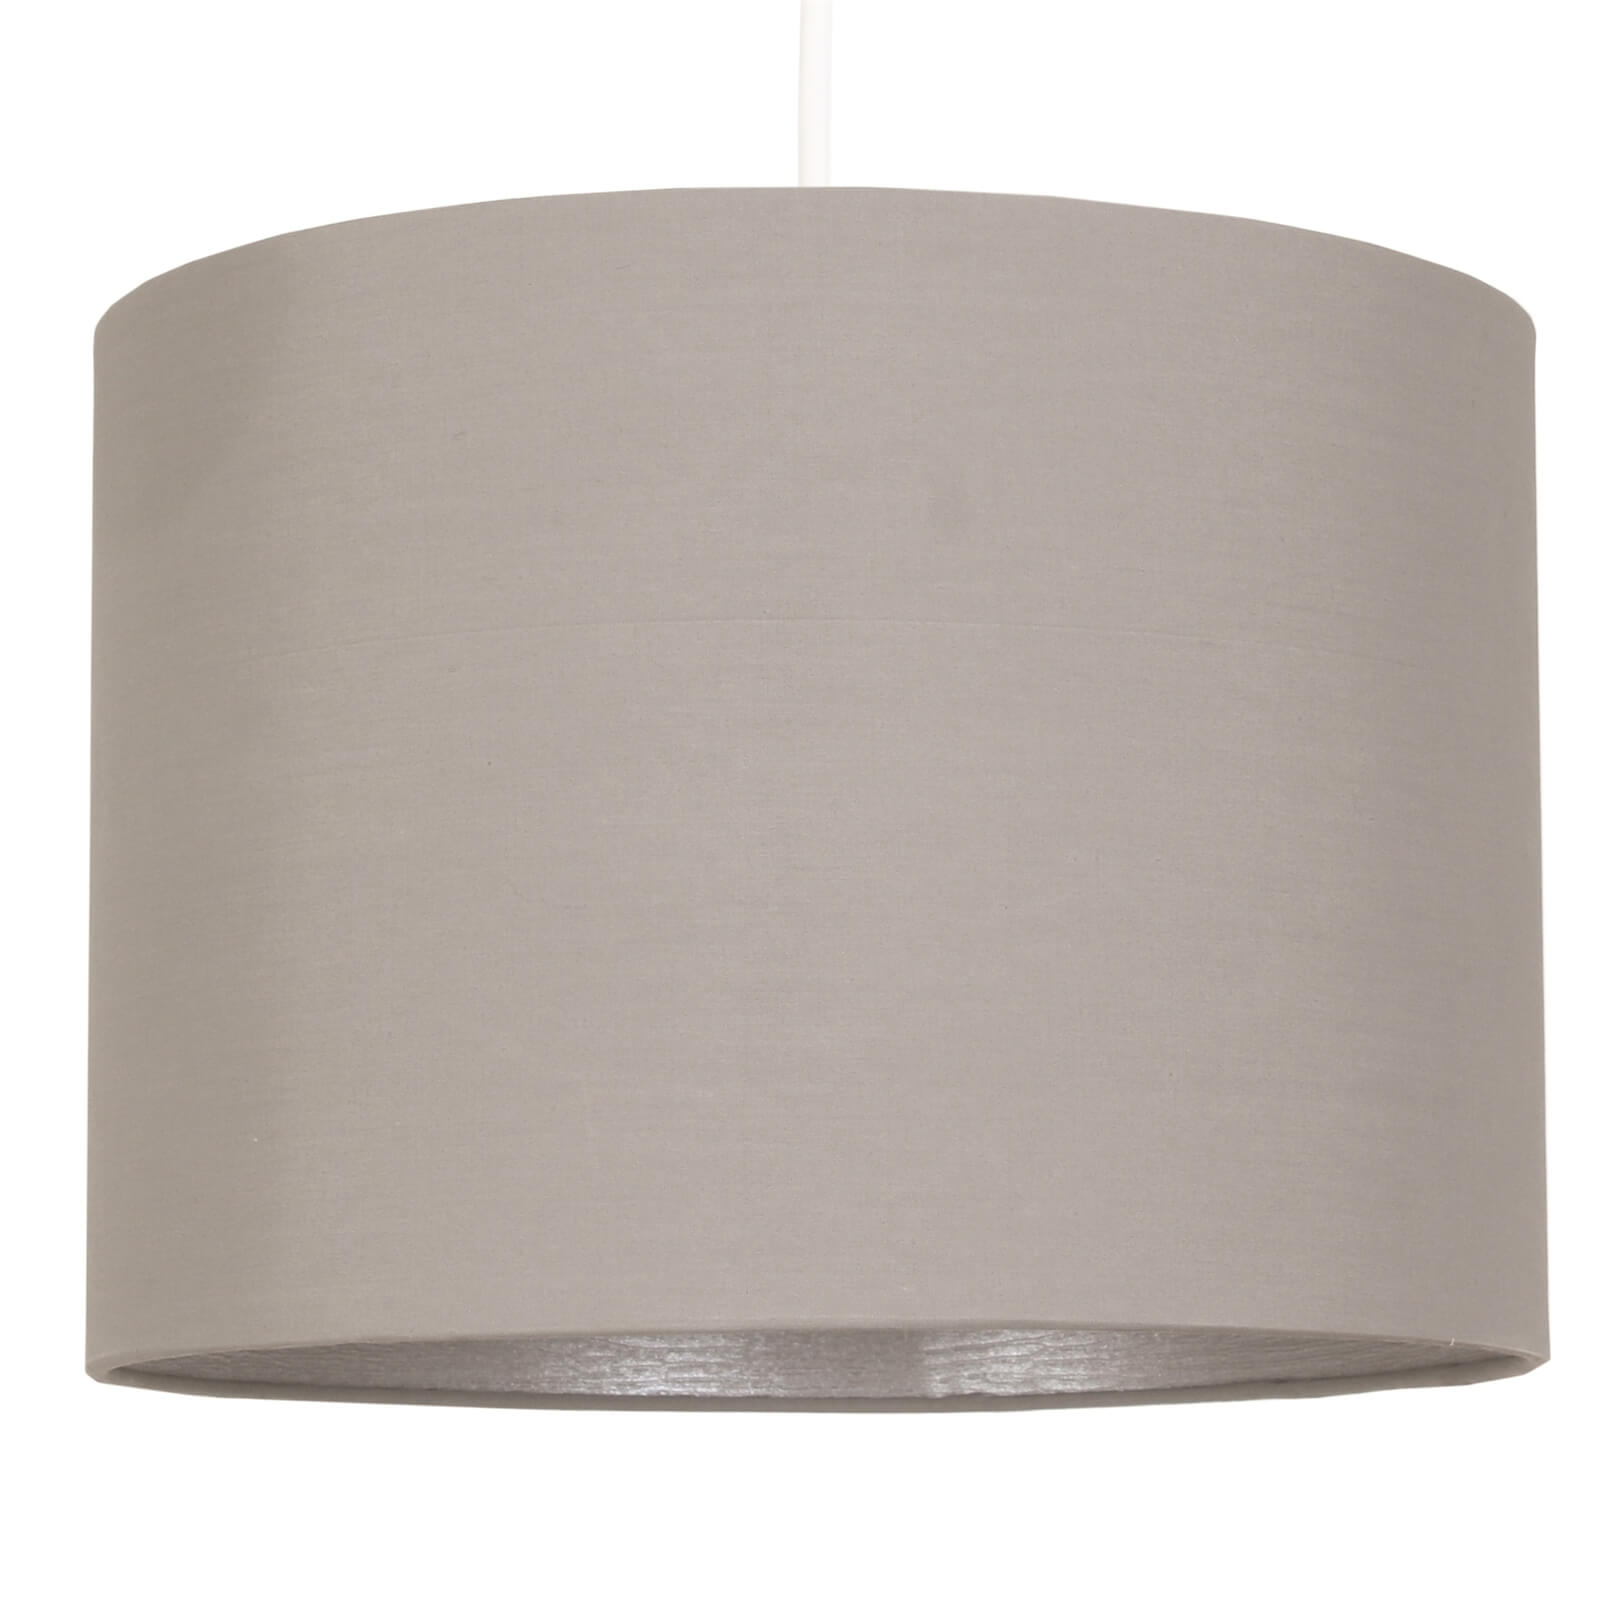 Clark Lamp Shade - Grey with Silver Inner - 40cm